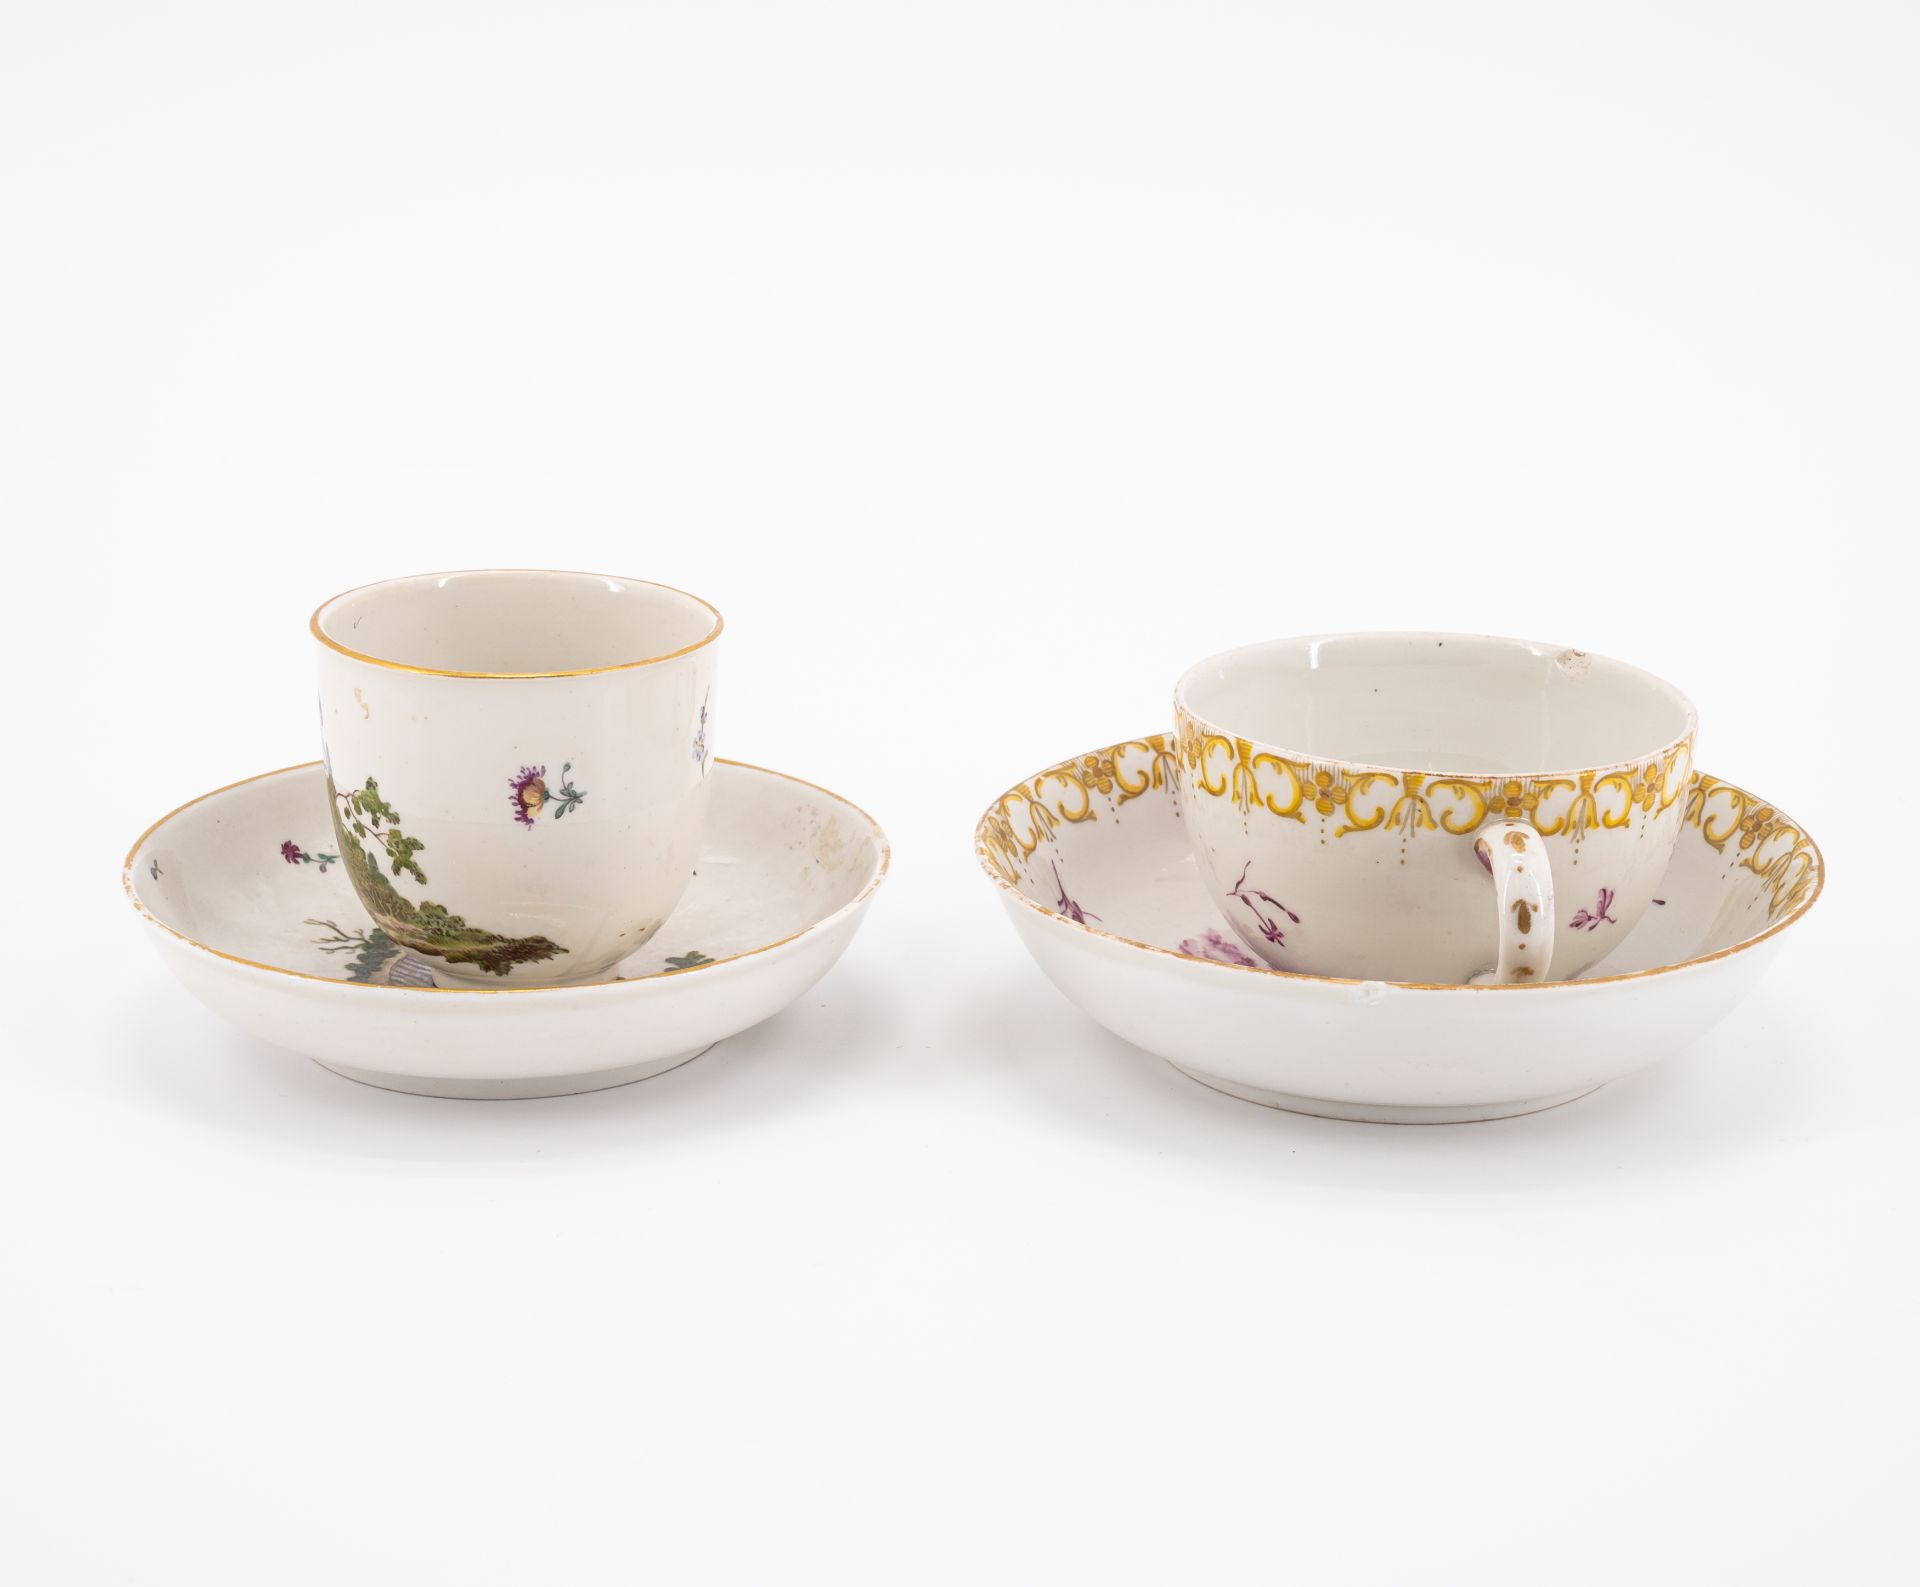 PORCELAIN SLOP BOWL, THREE CUPS AND SAUCERS WITH FIGURATIVE AND FLORAL DECOR - Image 13 of 22